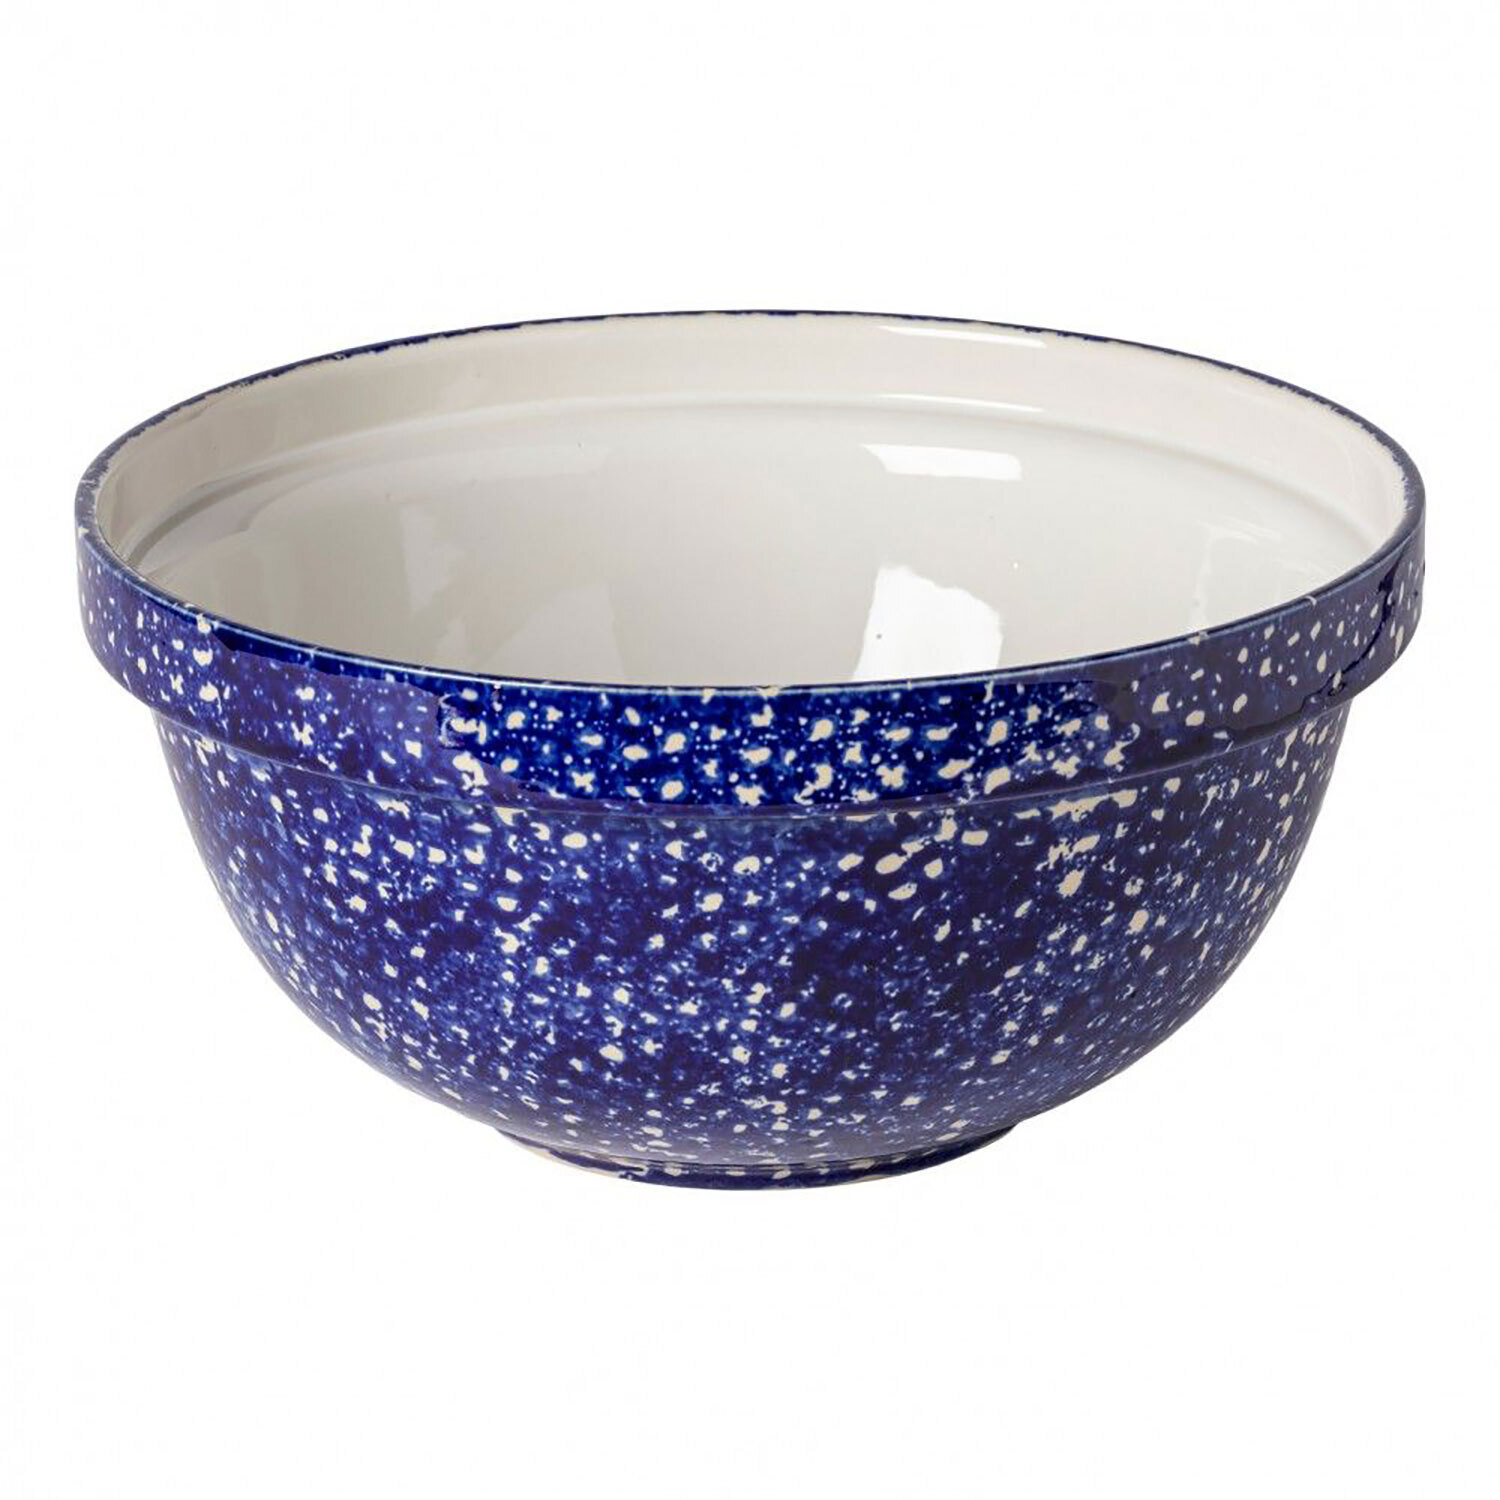 Casafina Abbey Blue White Splatter Mixing Bowl 12 Inch MBS311-BWH